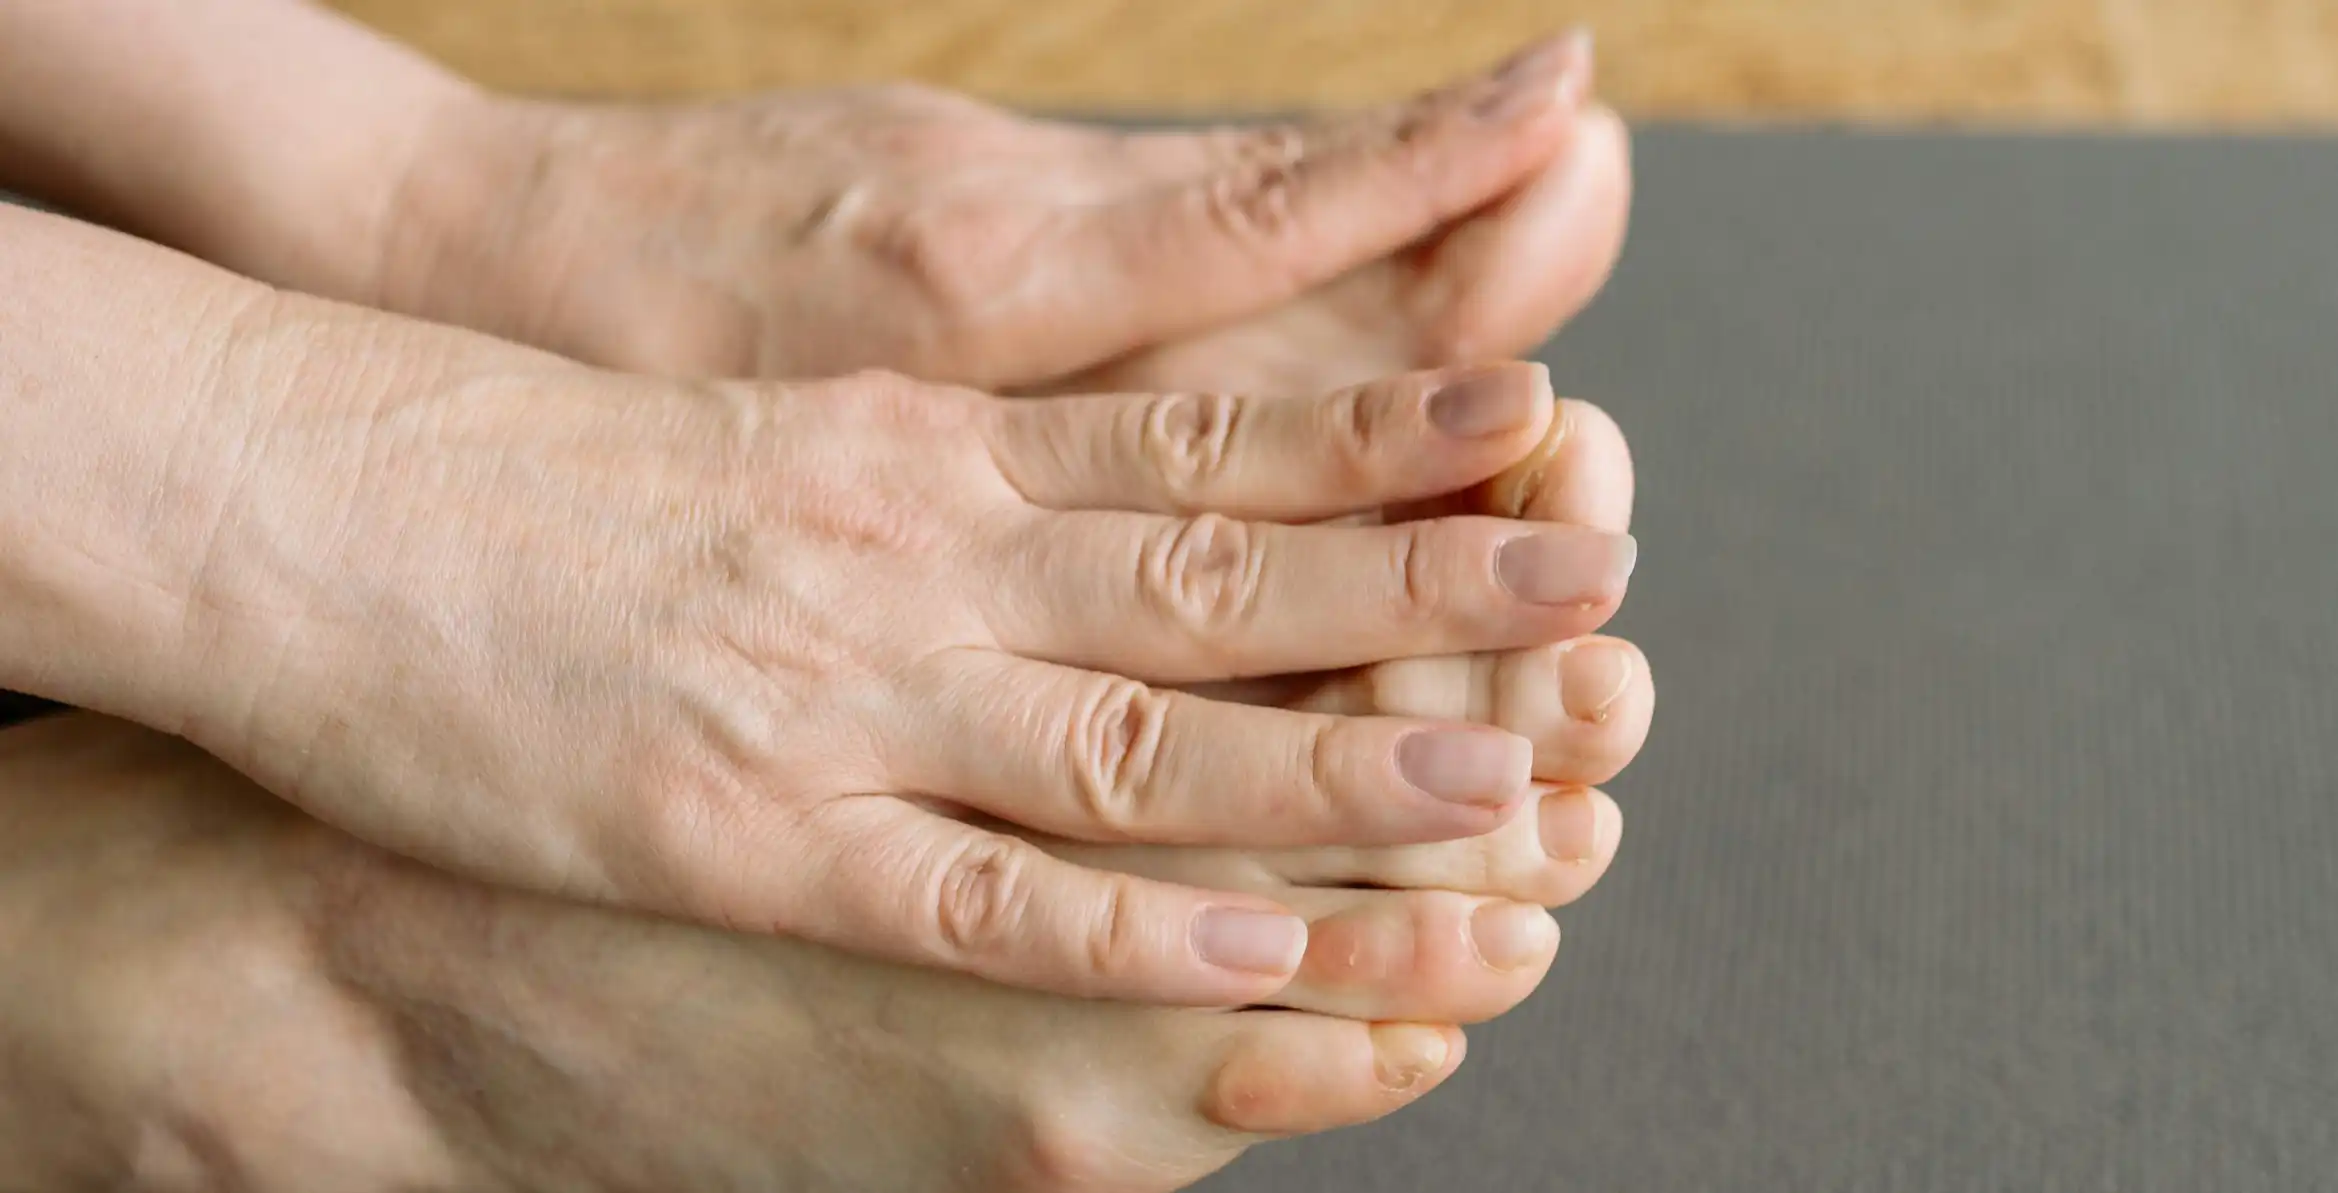 Physical Therapy for Foot Pain